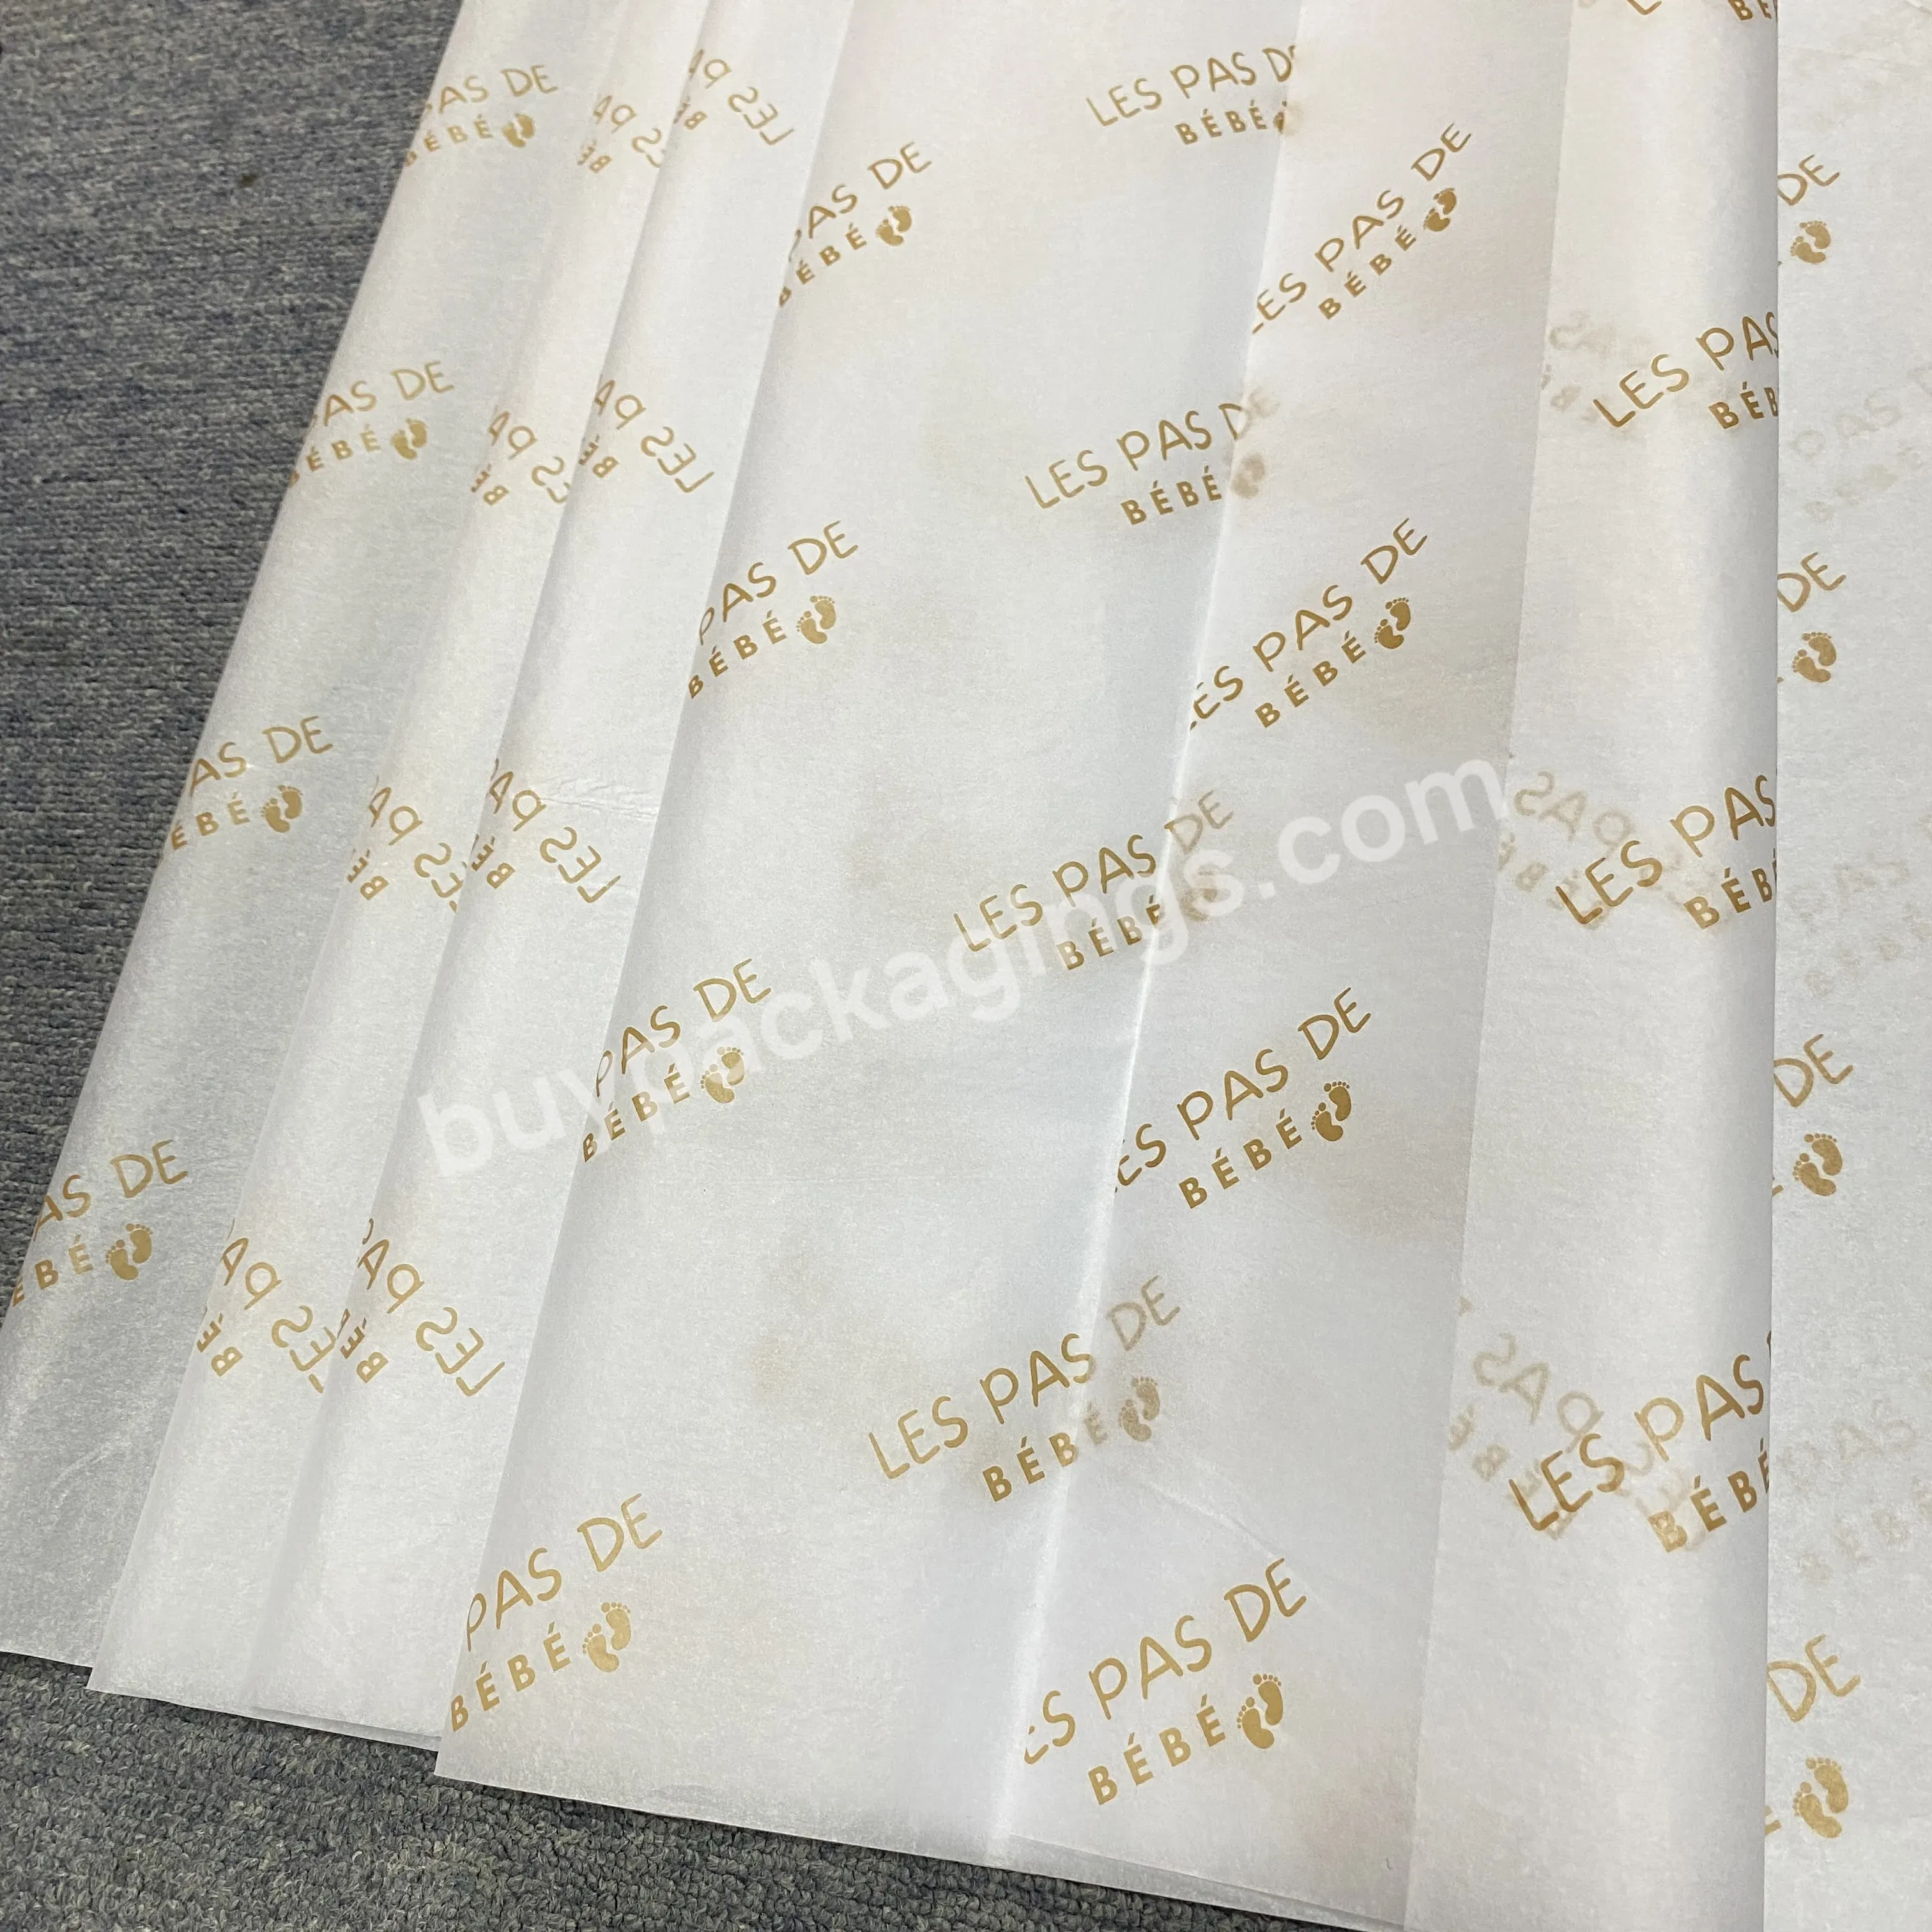 Wholesale Logo Printed 17g /30g Wrapping Paper Tissue Wrapping Papers For Gift Packing - Buy Wrapping Flowers And Clothing,Moq Is 100 Pcs,Customized Logo And Size.